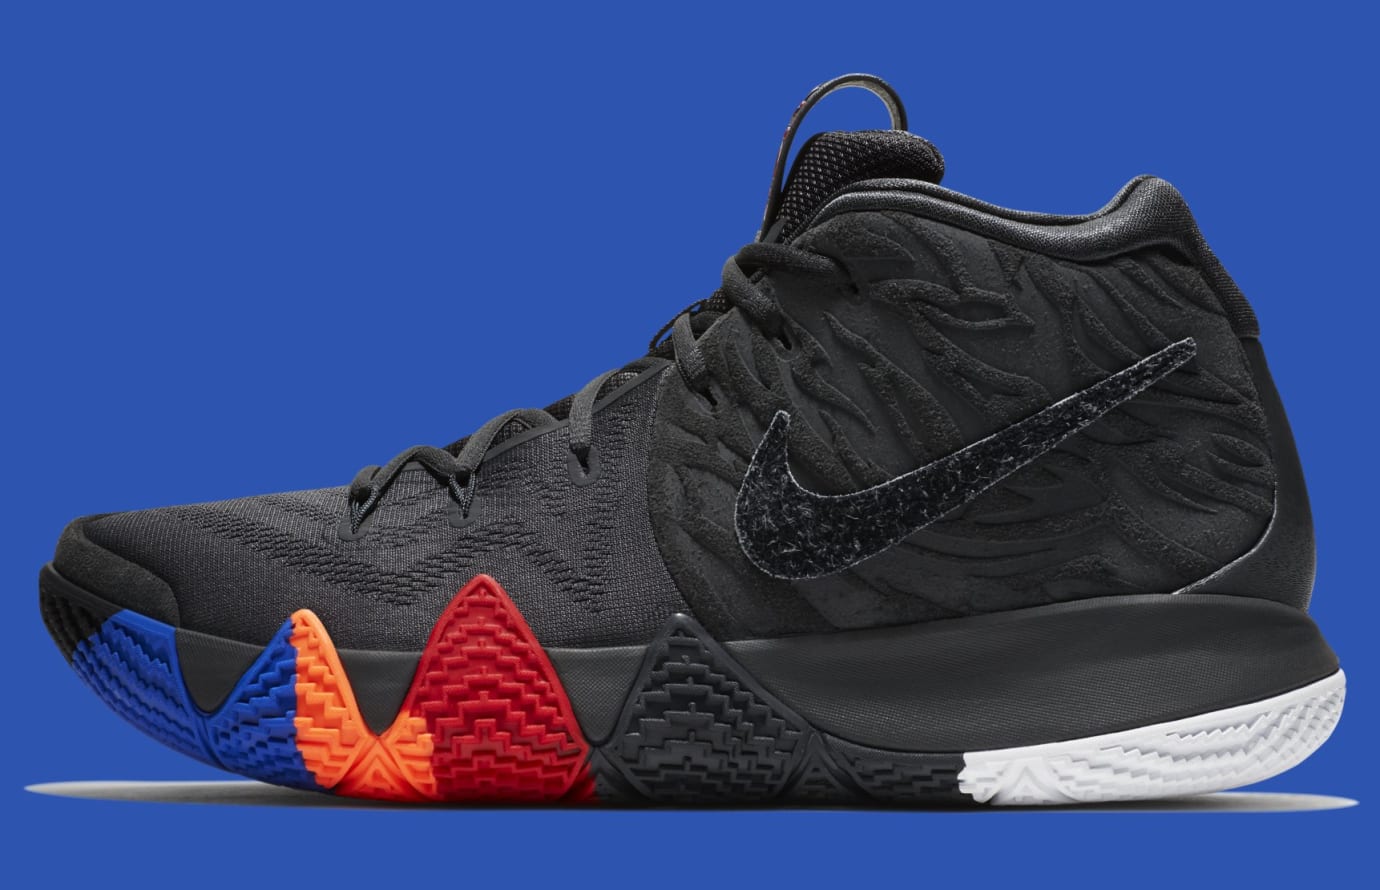 Nike Kyrie 4 'Year of the Monkey' 943807-011 (Lateral)